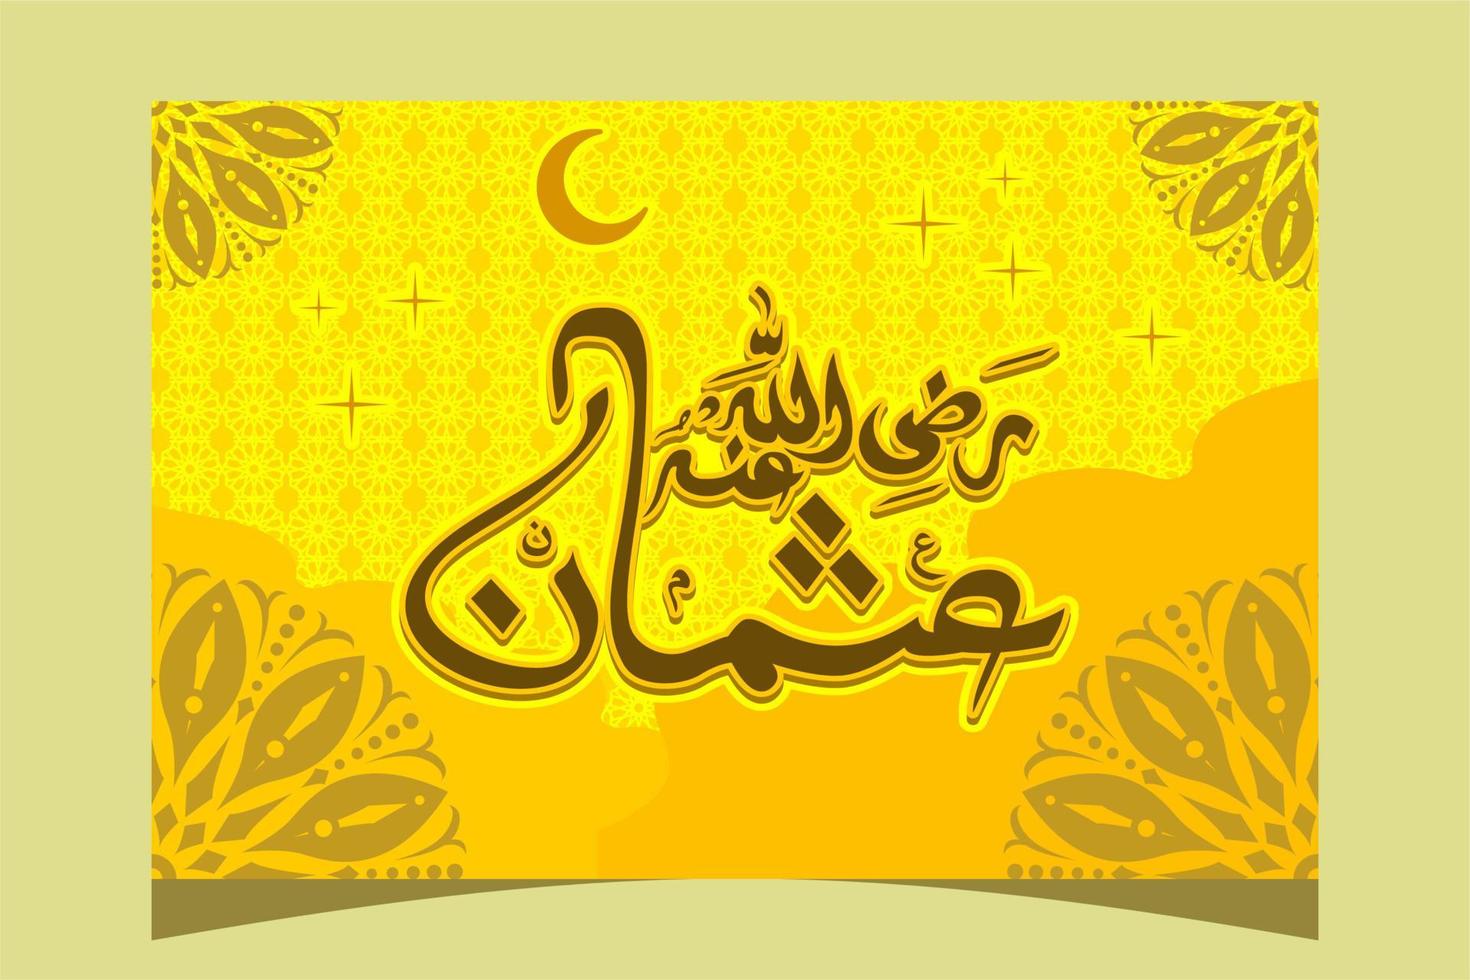 Islamic Calligraphy Ustman Radhiyallahu Anhu Friend Prophet Muhammad With Bright Colours For Banners And Greeting Cards Design Inspiration vector